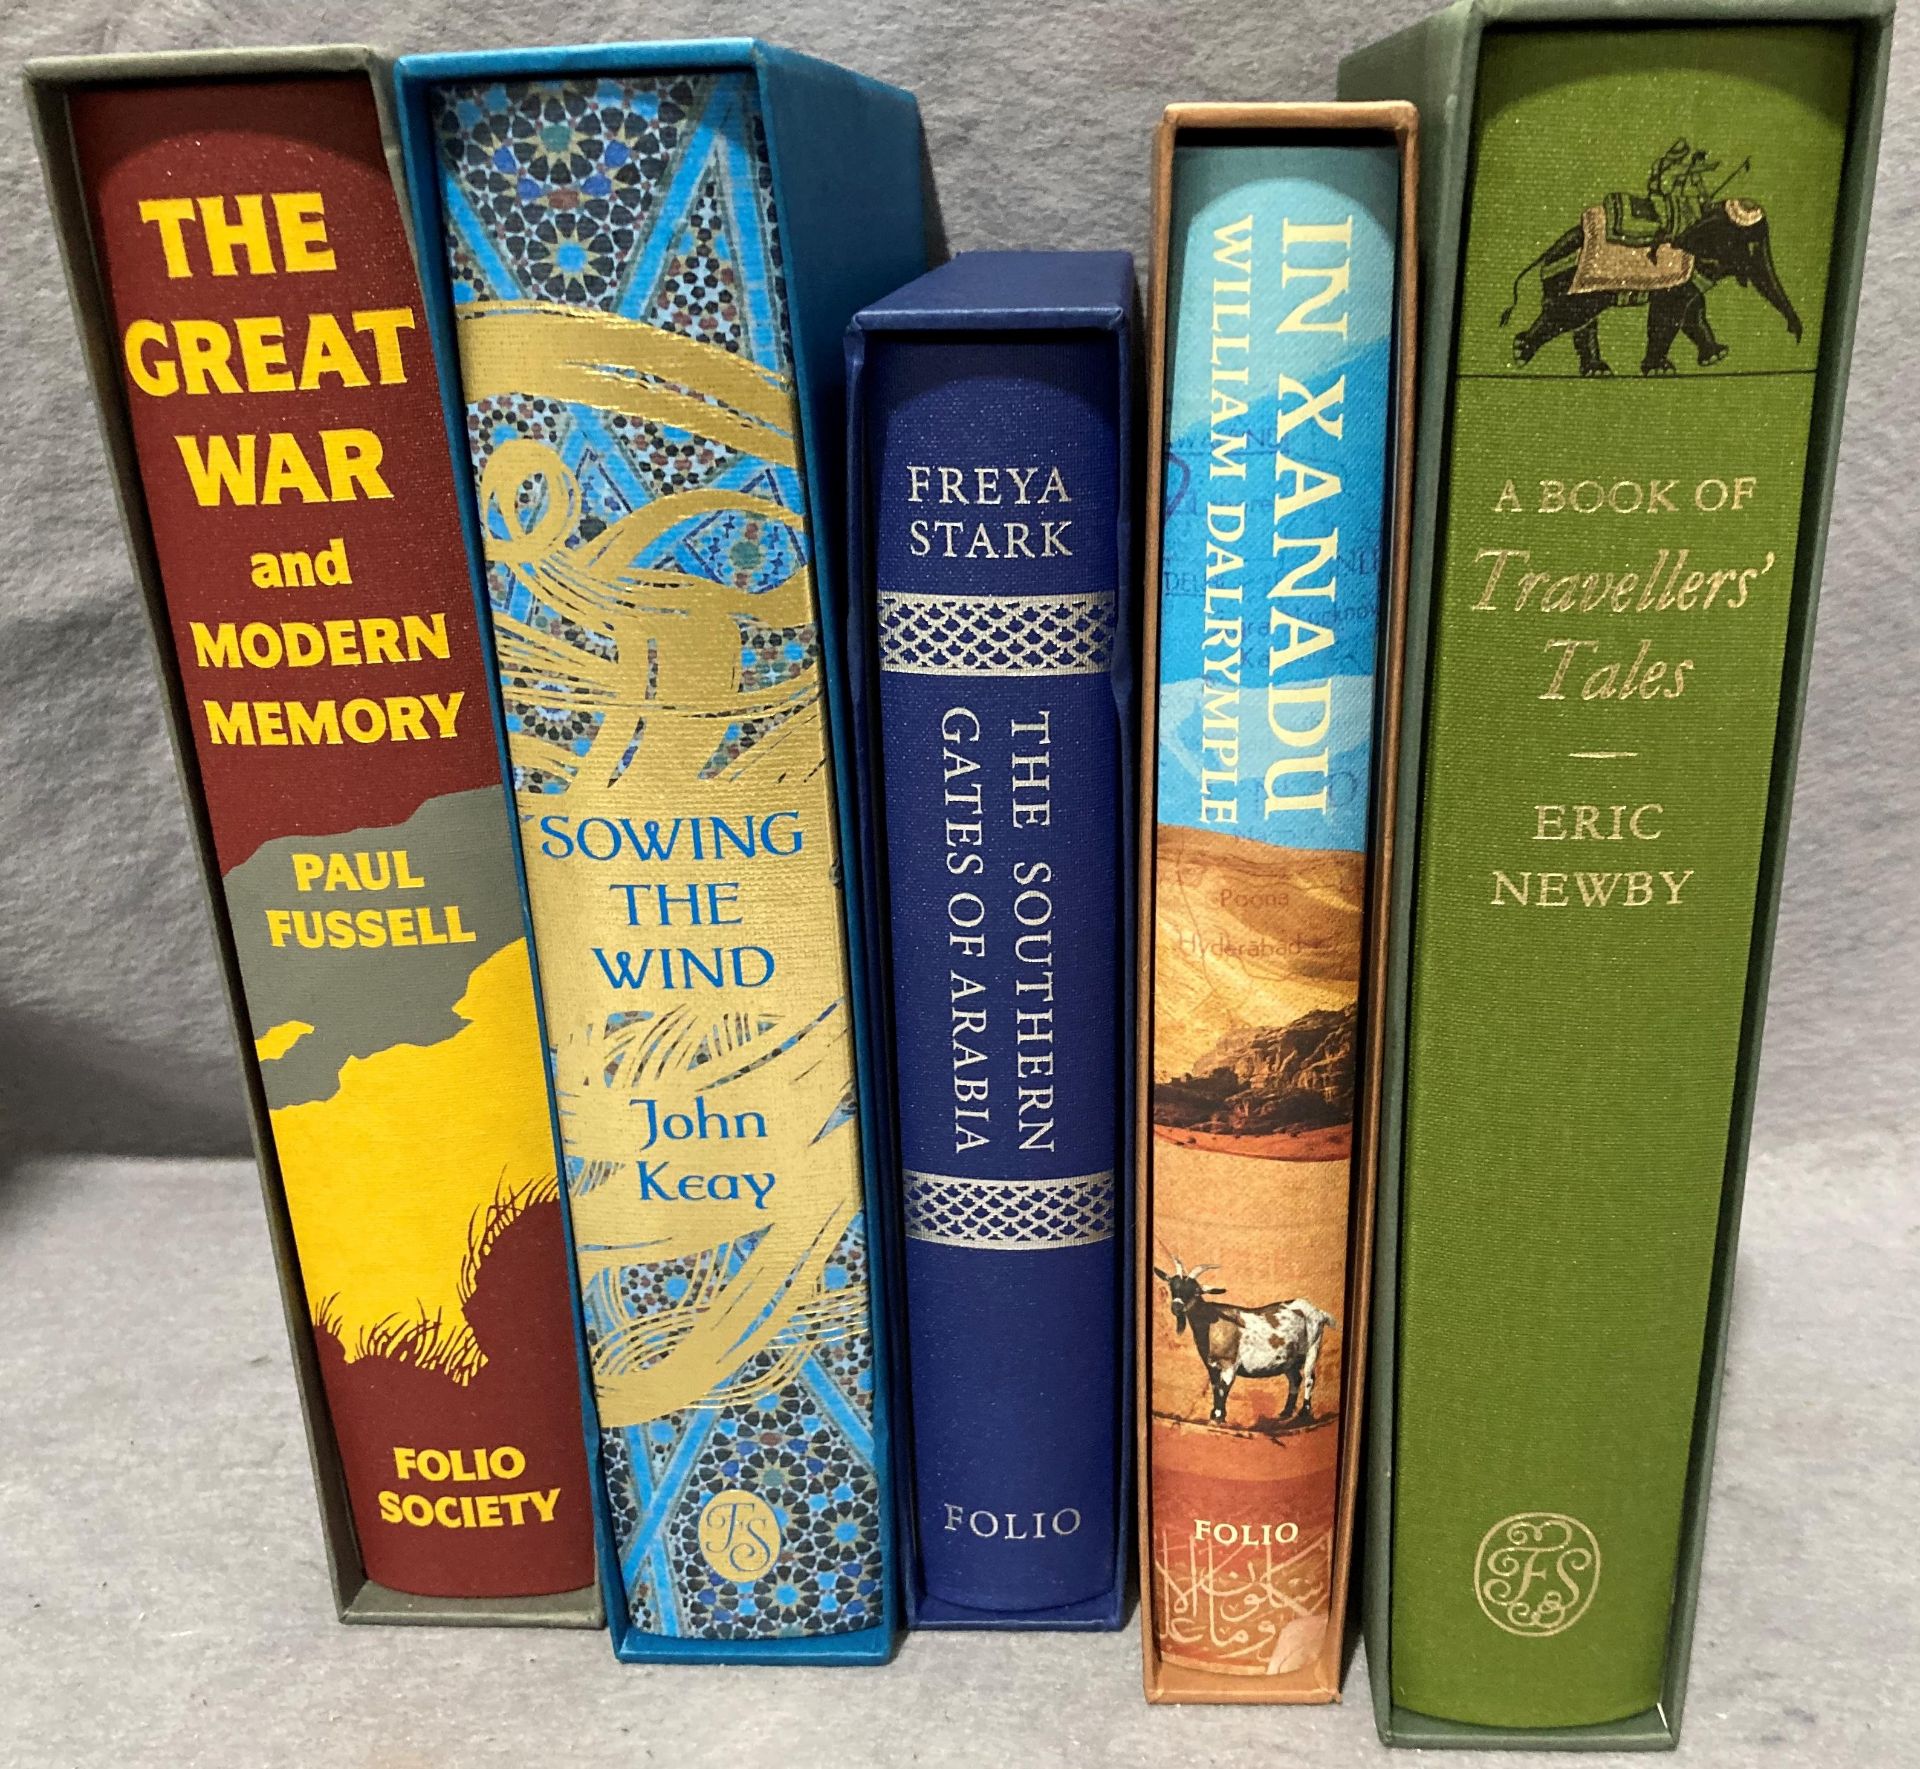 Folio Society - Five books all in cases - Paul Fussell 'The Great War and Modern Memory',